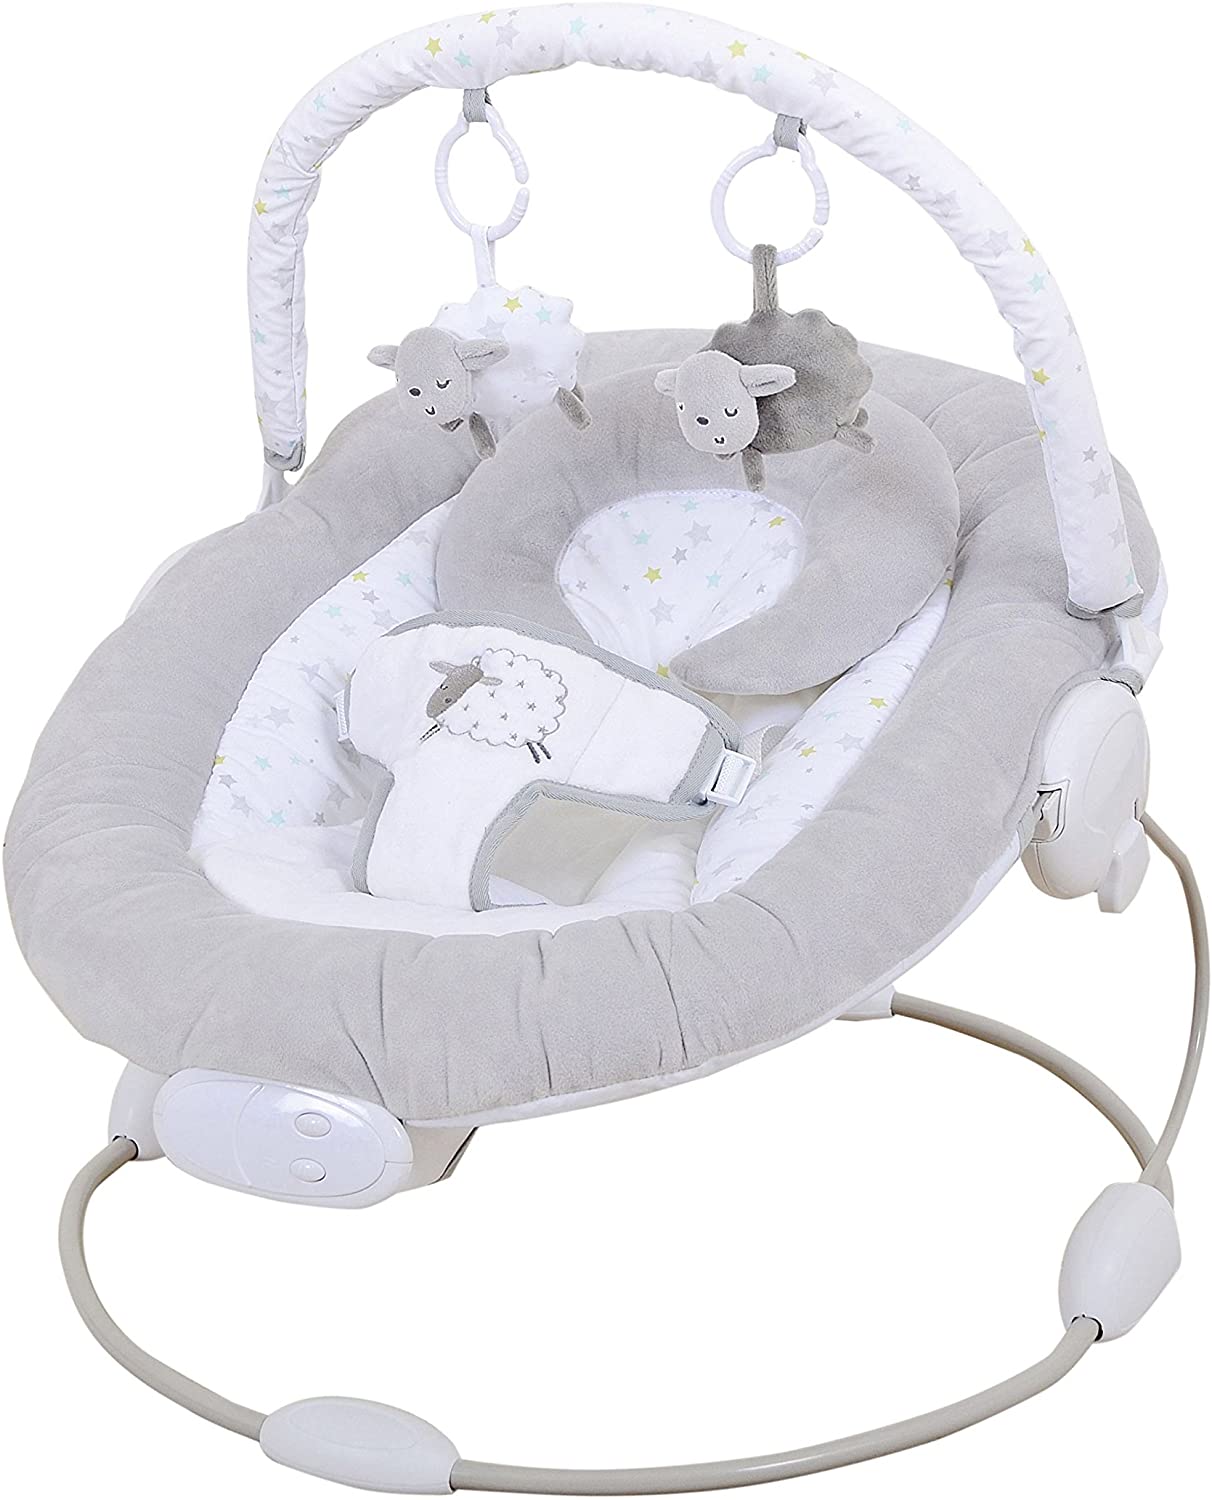 Joie rocking bouncing cradles East Coast Baby Bouncer Counting Sheep